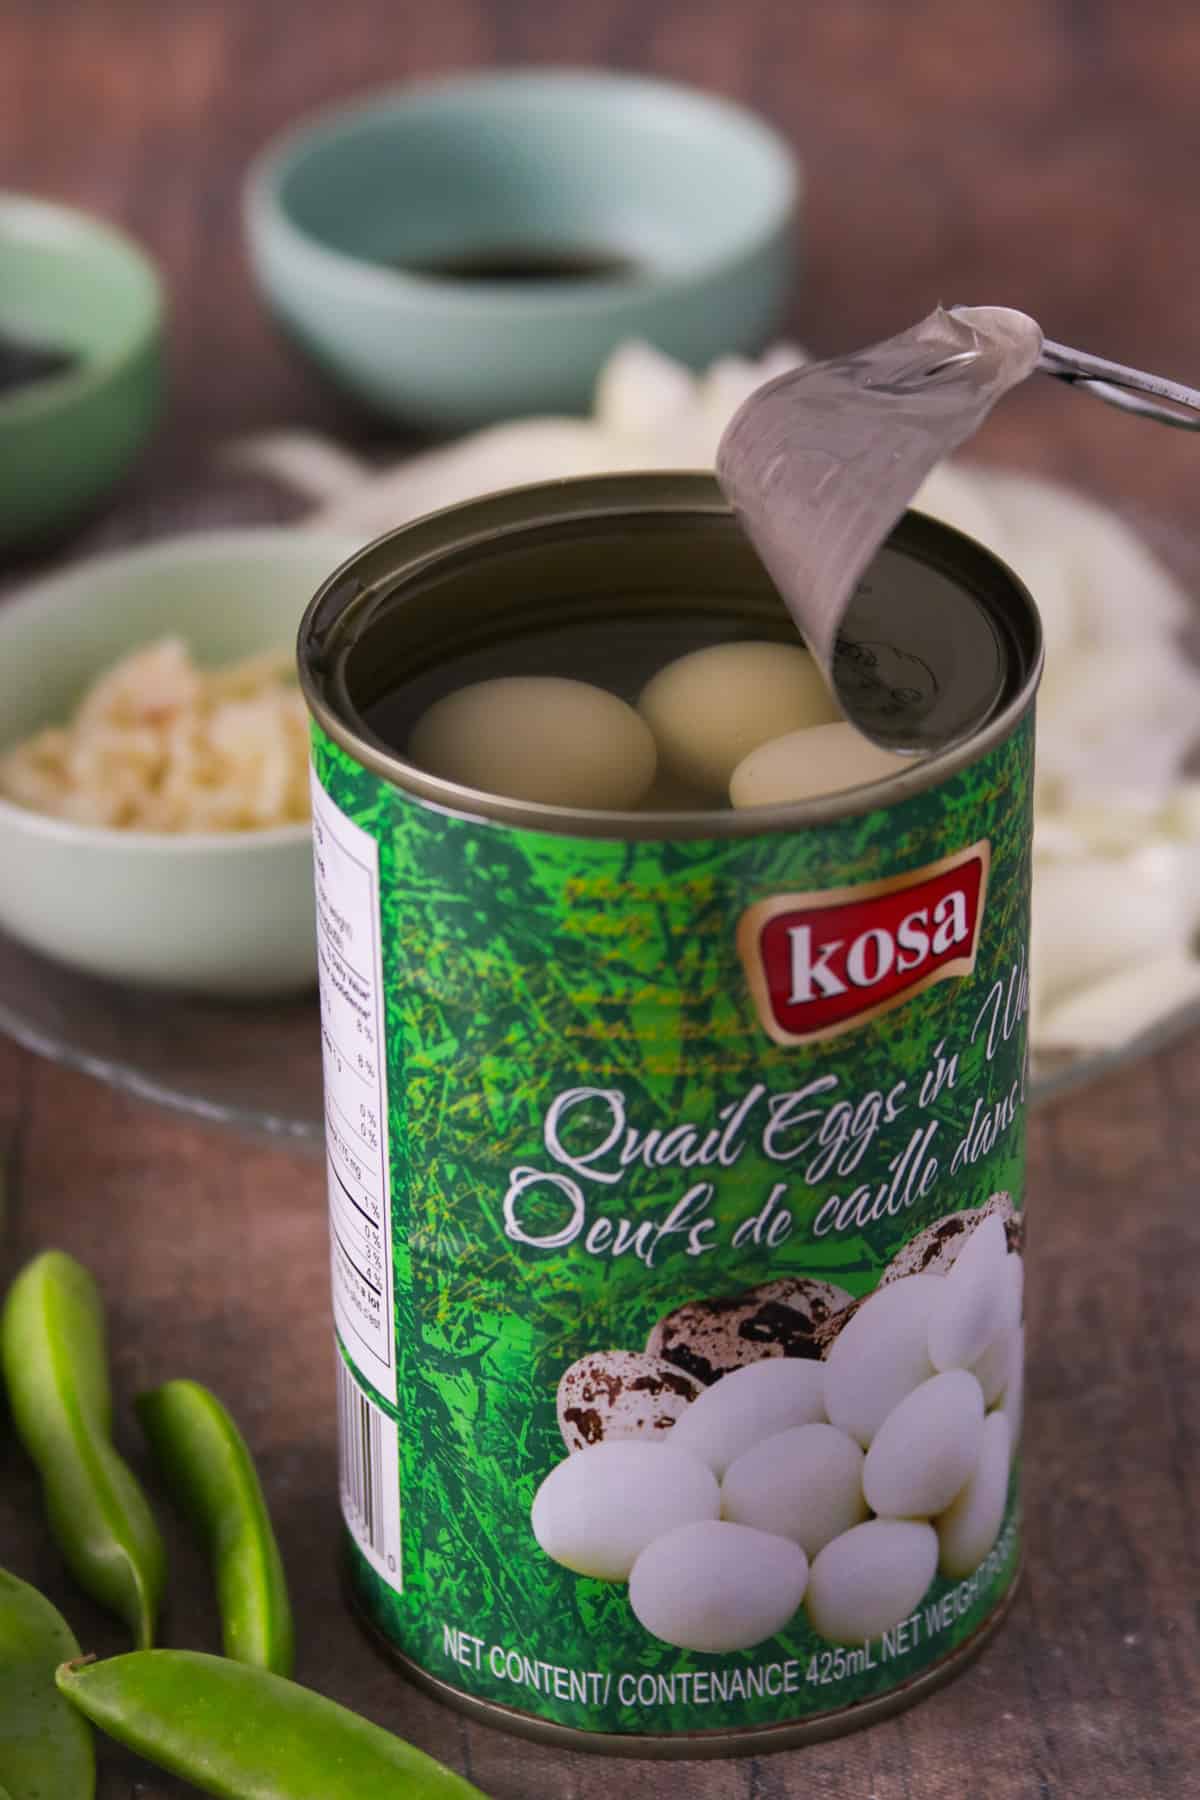 An opened canned quail eggs.